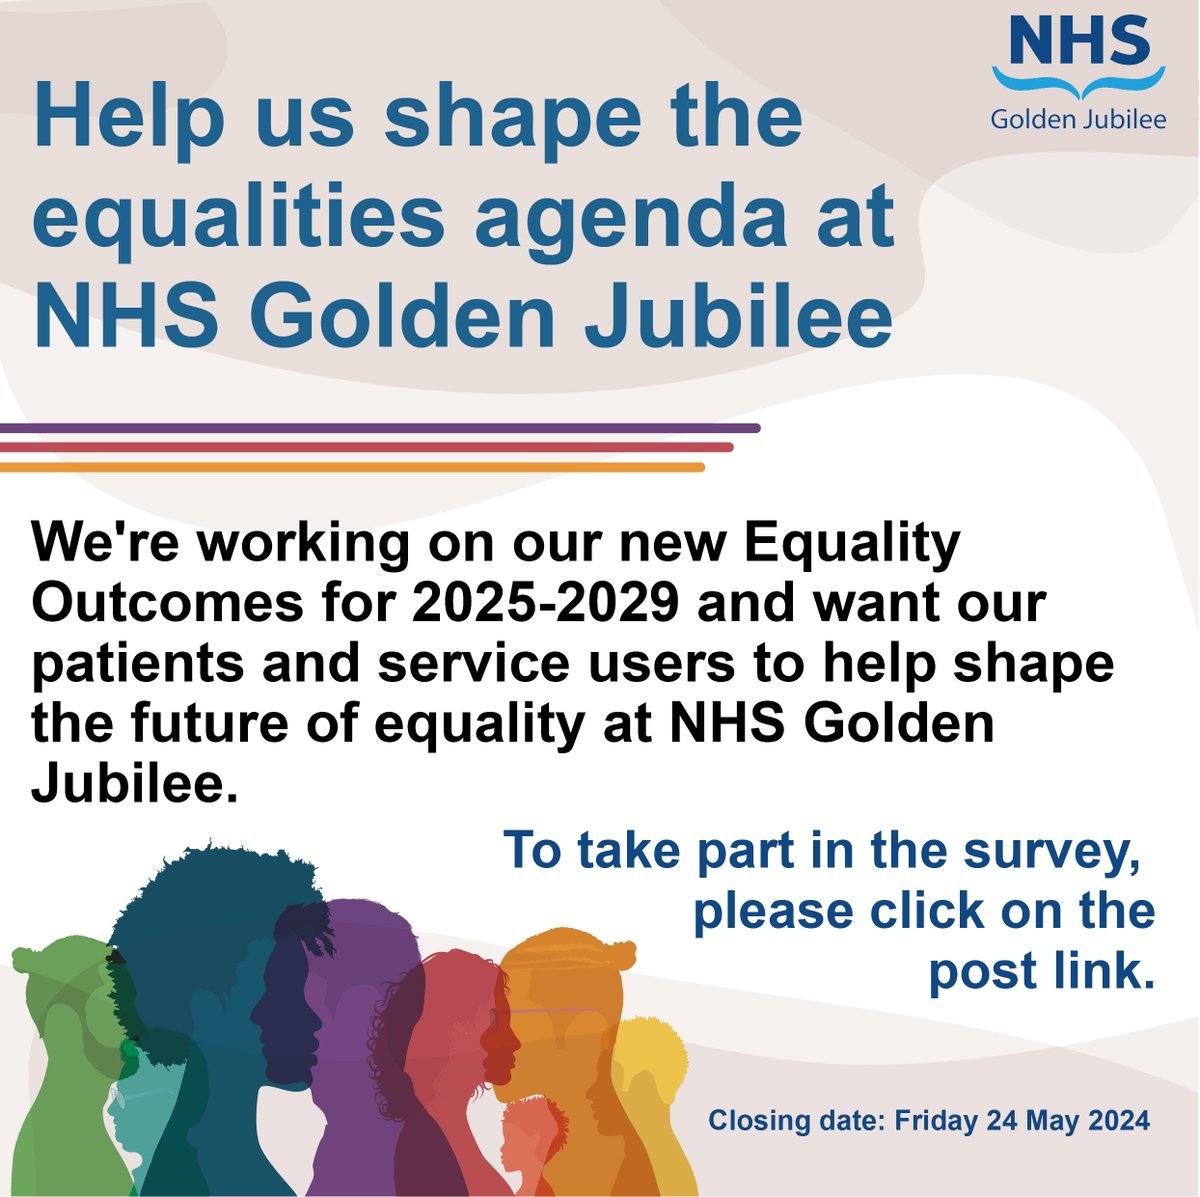 📣We need your help to establish our new set of Equalities Outcomes so that we can provide you with the best service to fit your needs. Please click the link to fill out our short survey and help share the future of equality at NHS Golden Jubilee👉 forms.office.com/Pages/Response…